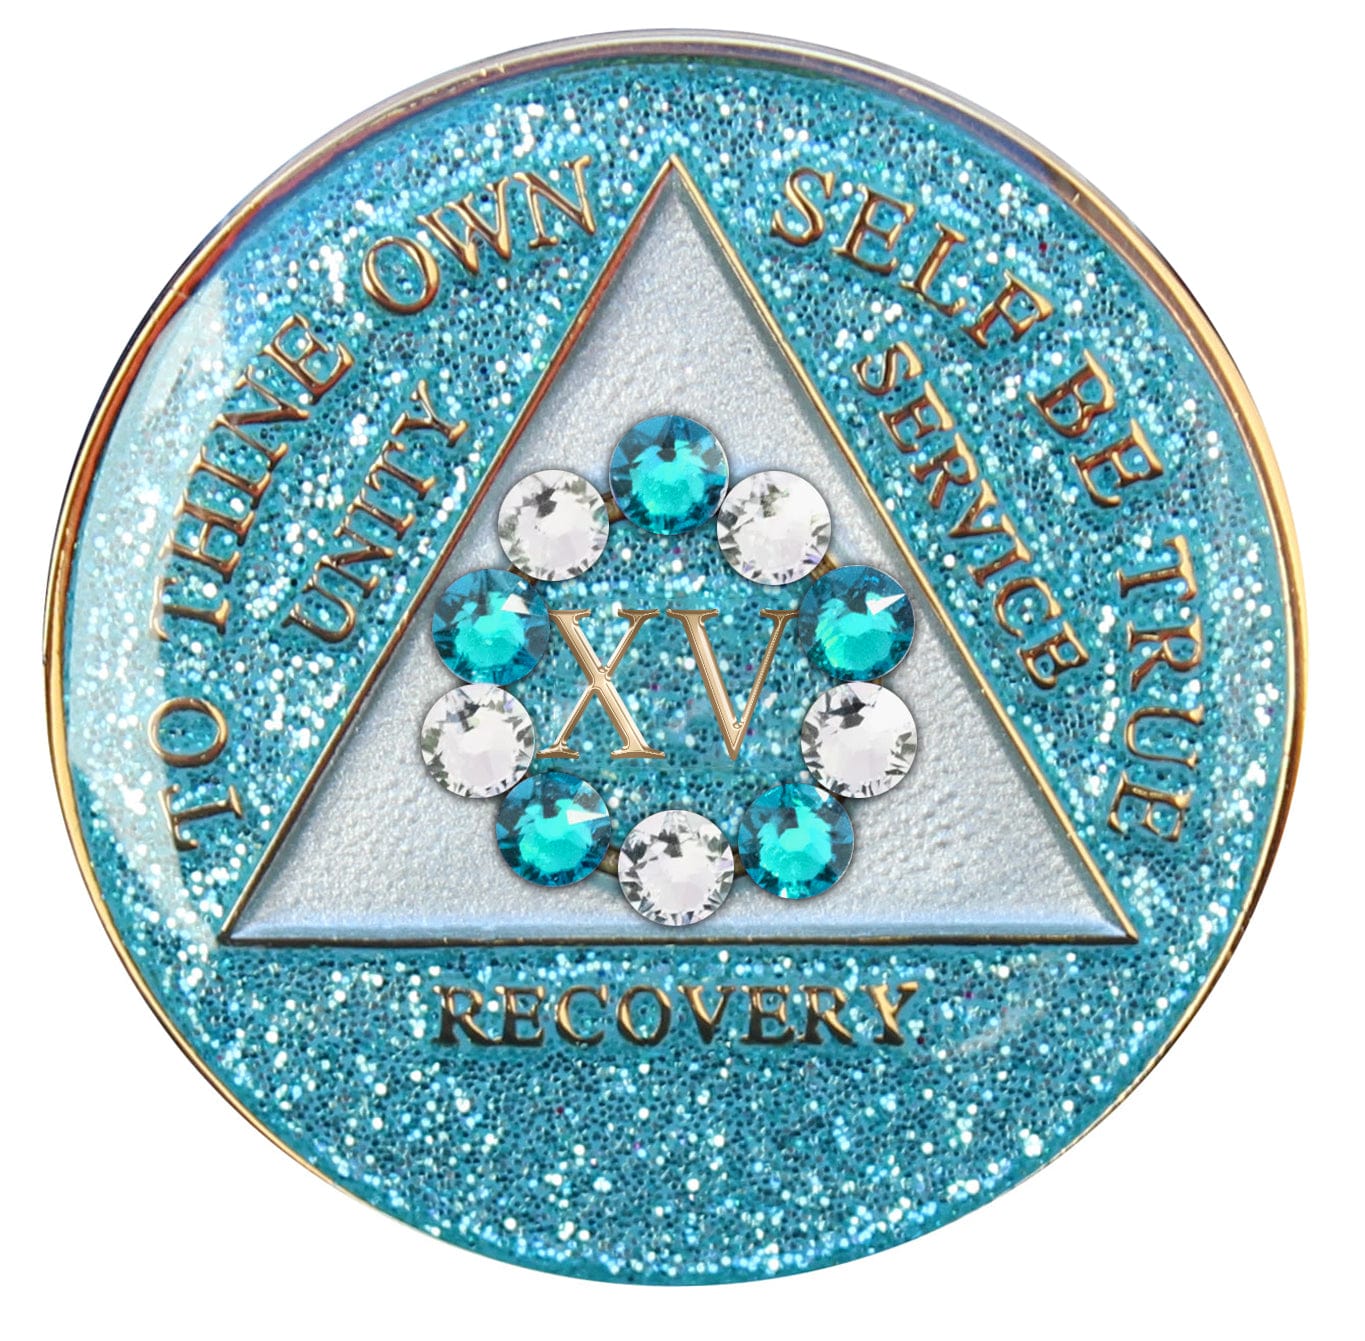 15 Year Deep-sea Aqua glitter 10th step AA medallion with 5 blue genuine crystals and 5 clear genuine crystal, formed in a circle around the year, to thine own self be true, triangle in the center and unity, service, recovery, along with rim of medallion are slightly raised in 14k gold, the center of the triangle is pearl white with the circle being aqua glitter, all emphasizing action and reflection.